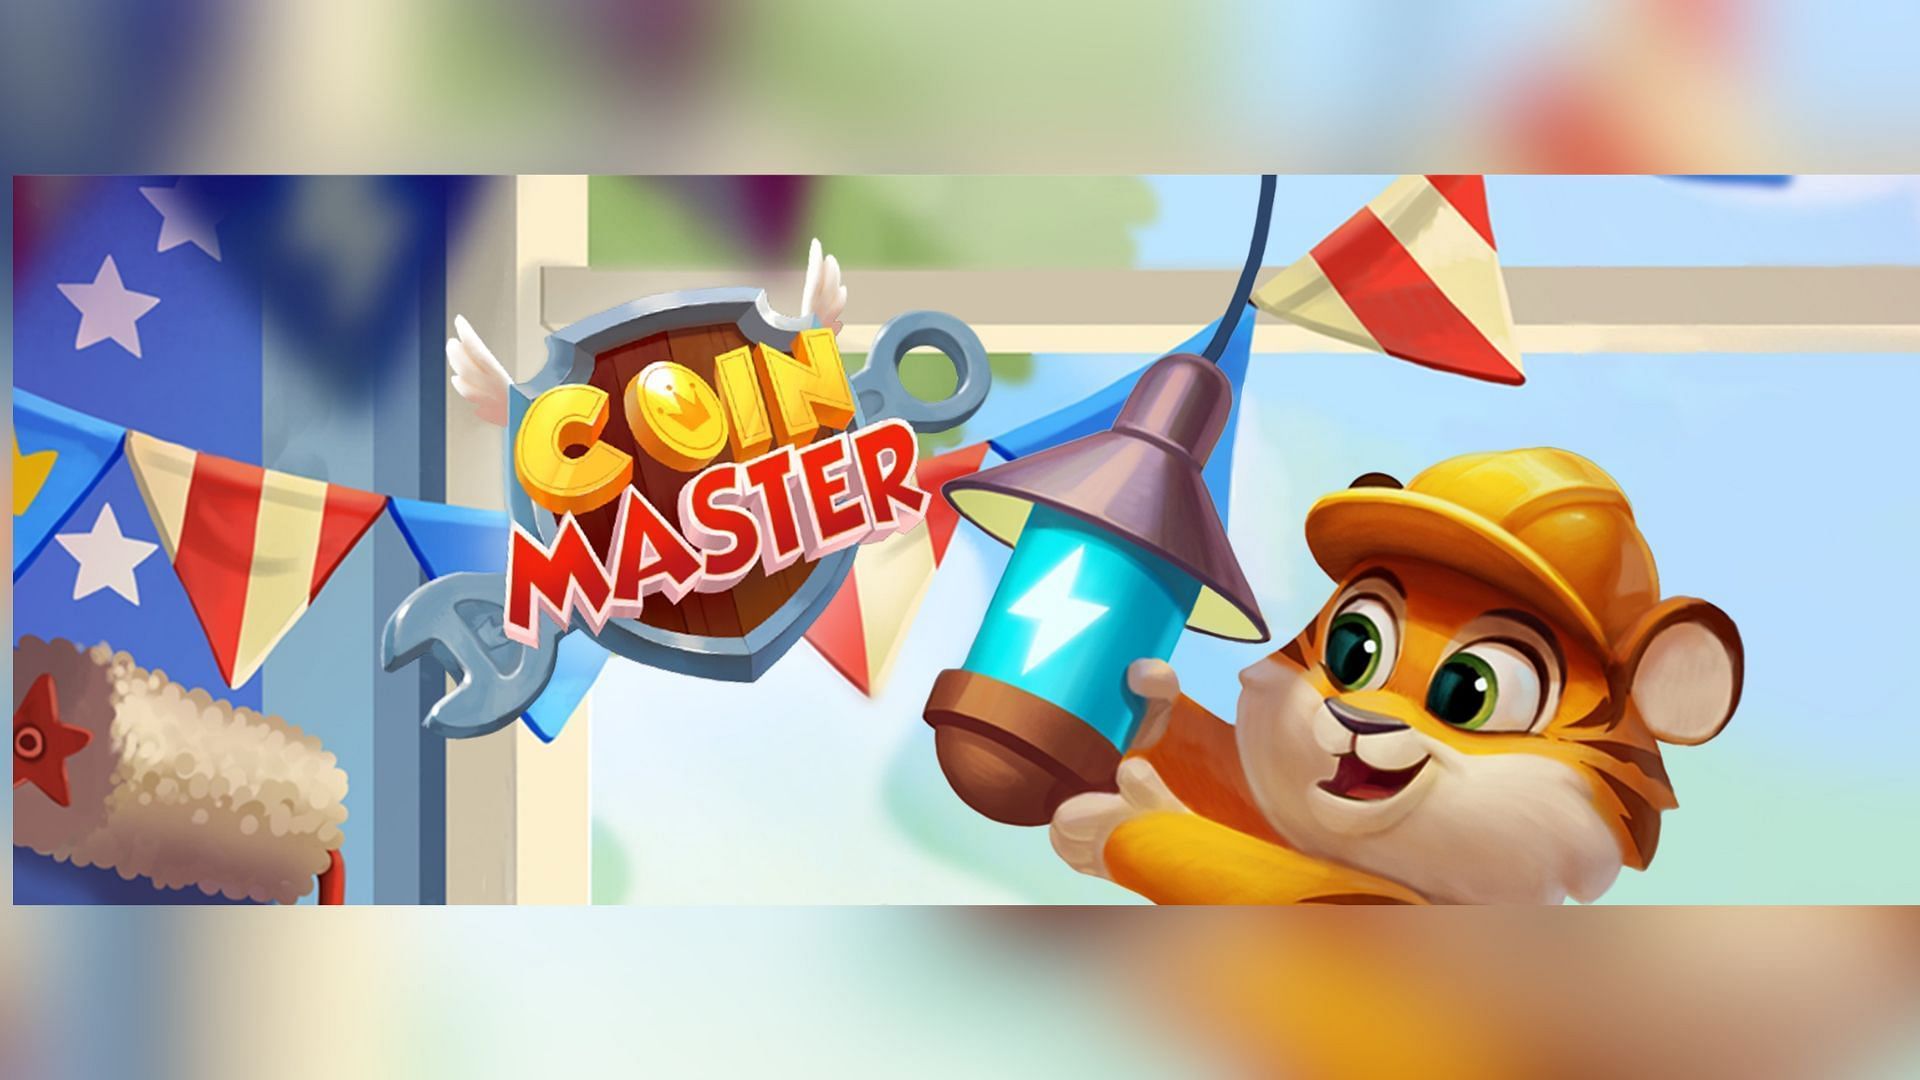 coin master 15 free spin link of last 5 days